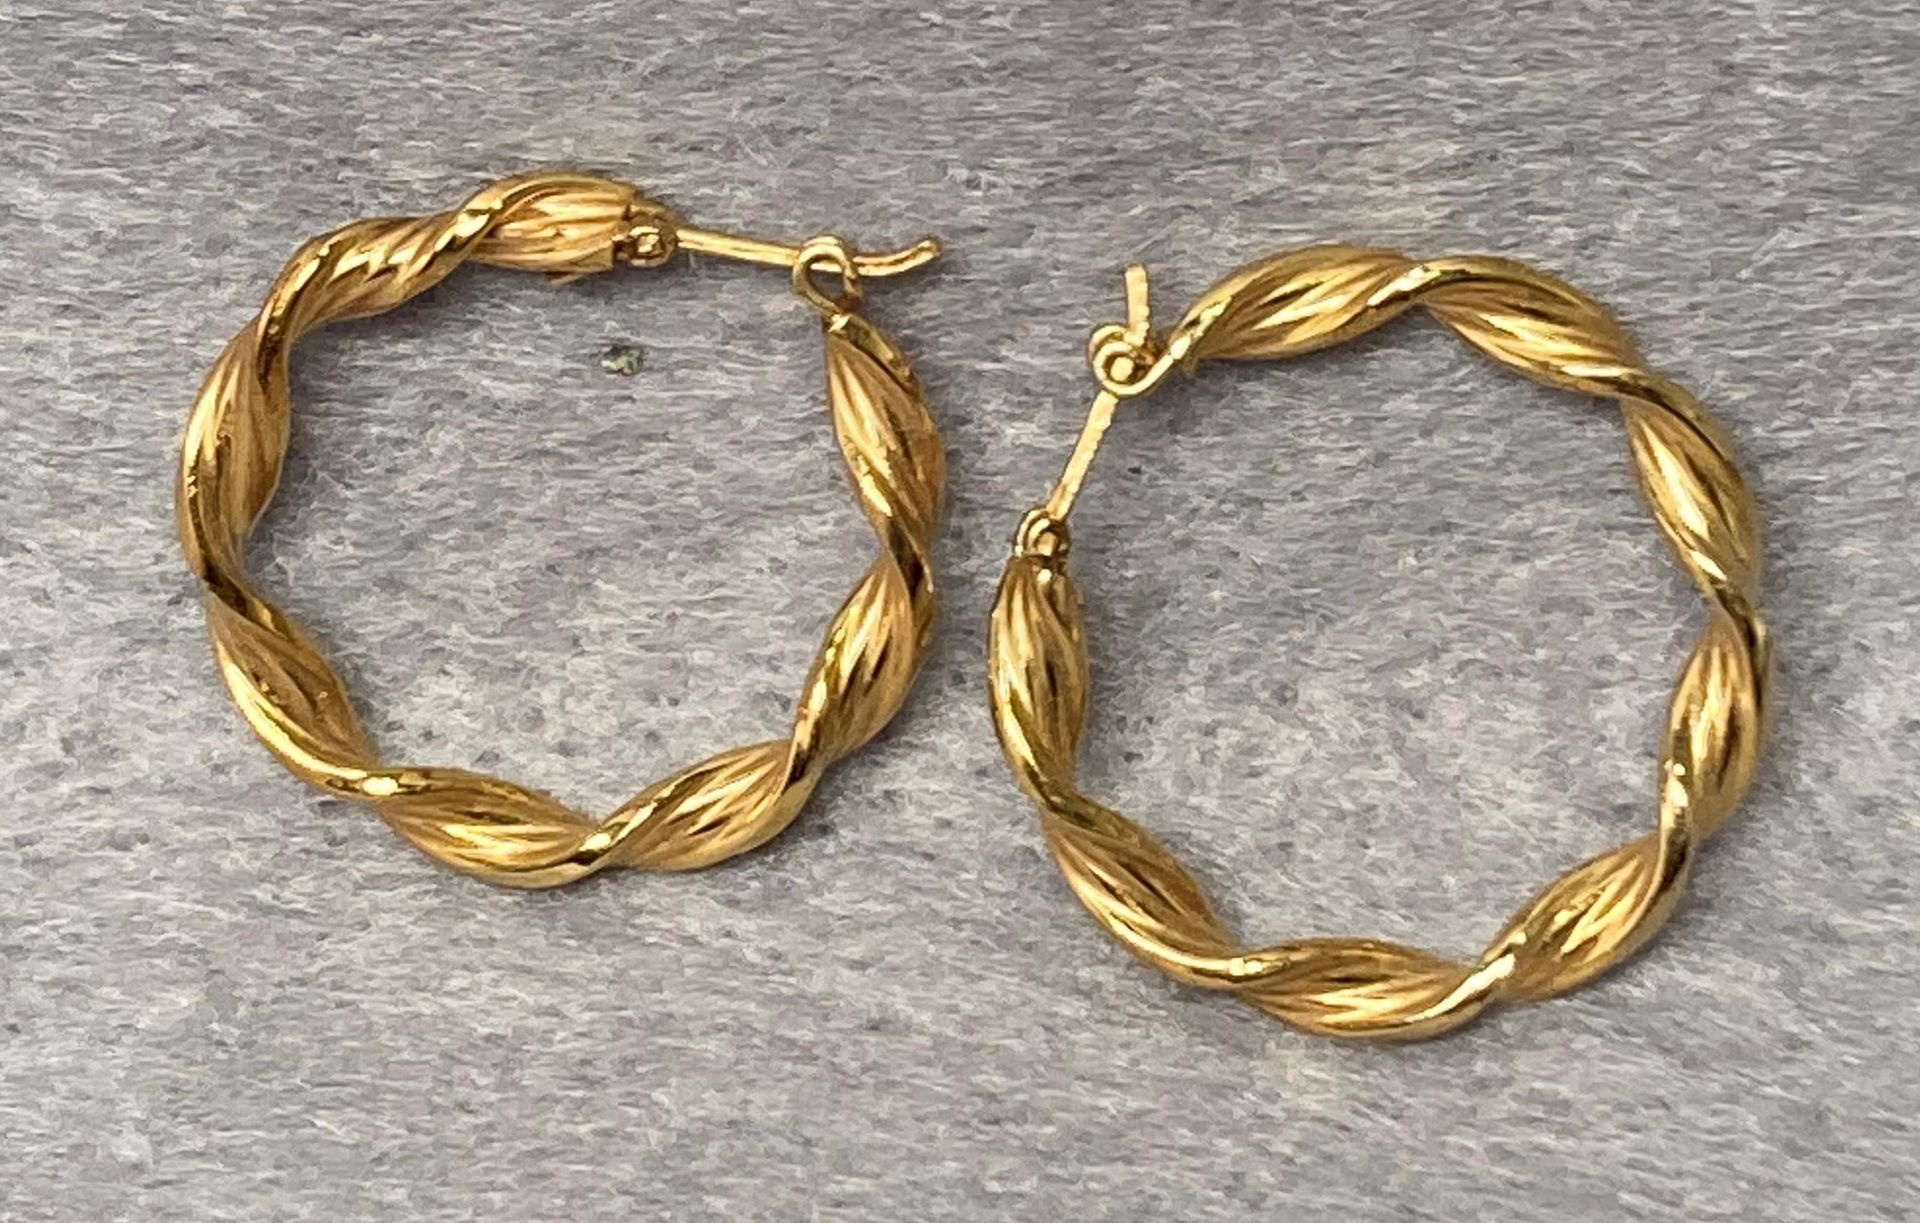 Two pairs of 9ct gold earrings - a twisted hoop pair and a flower stud pair together with a pair of - Image 4 of 4